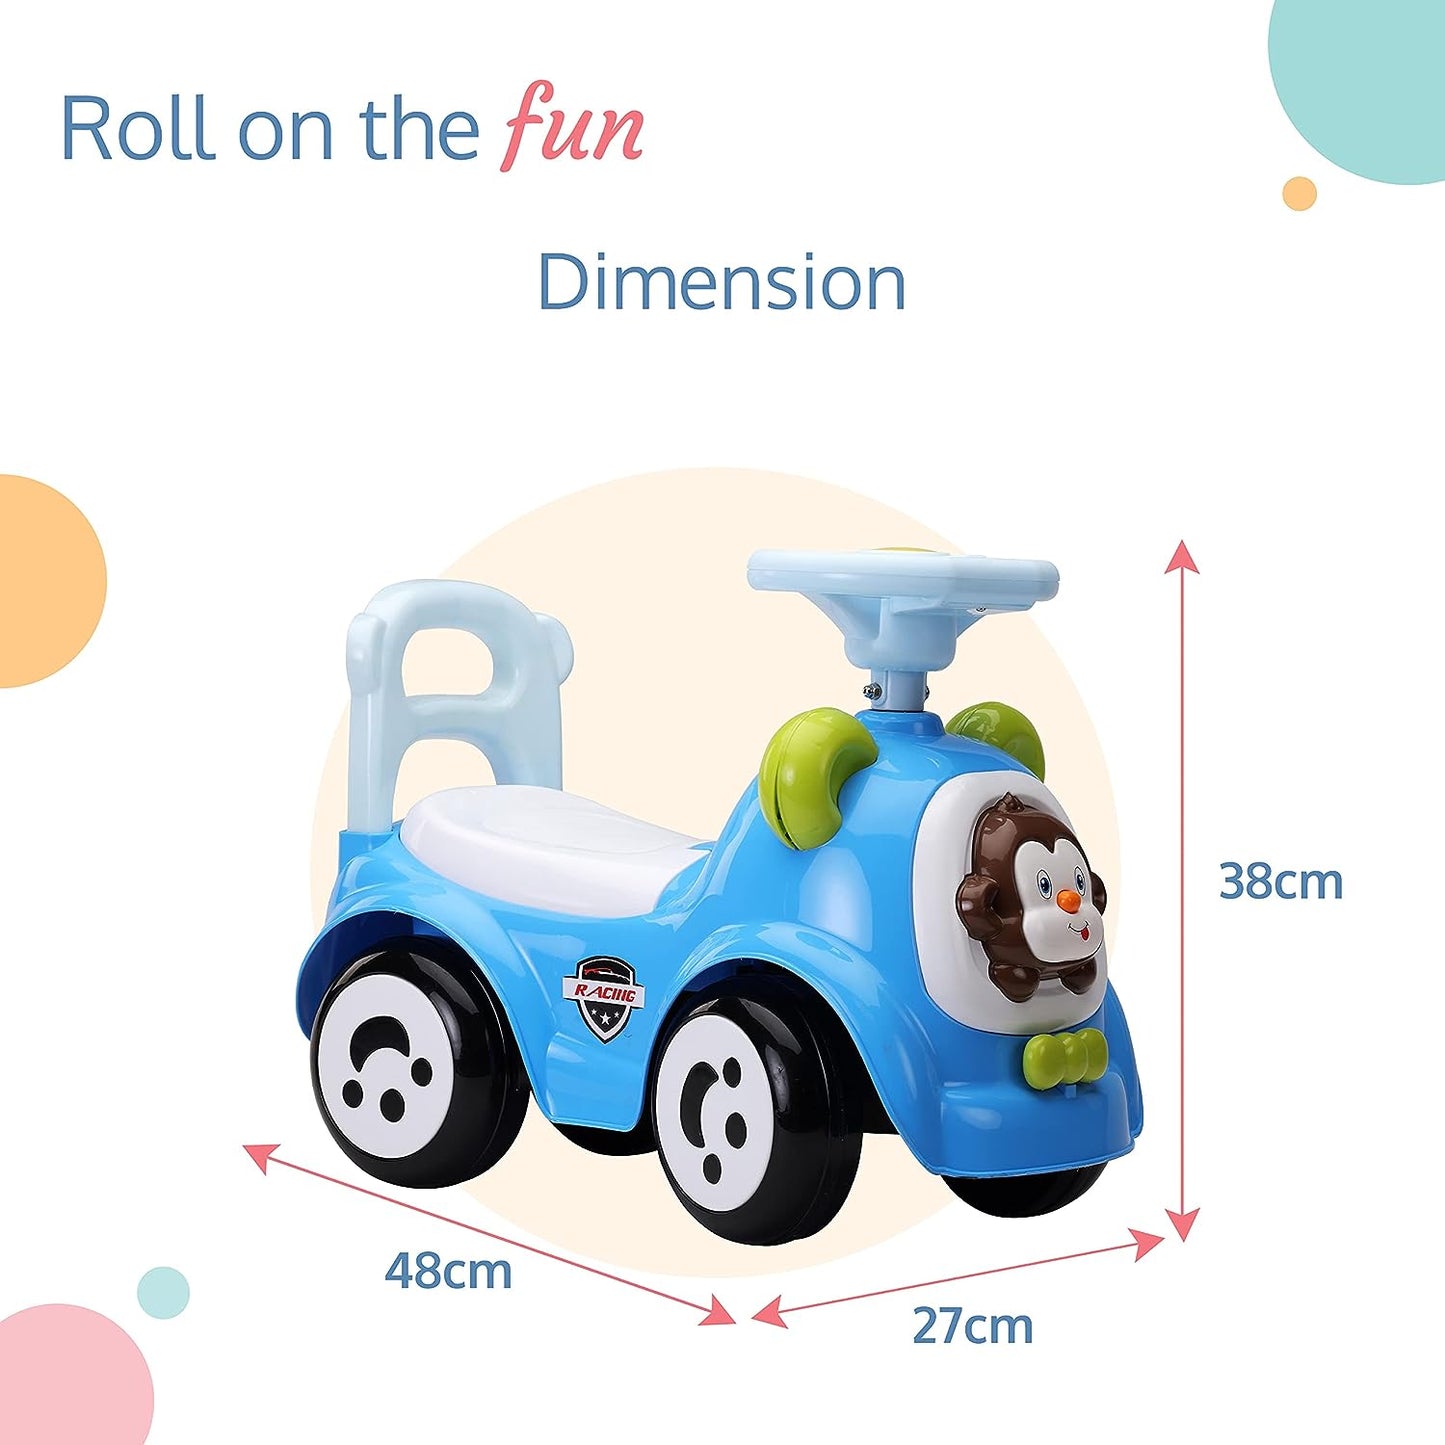 LuvLap - SunnyRider Blue, Music & Horn Steering Ride-On & Car for Kids, Backrest, Safety Guard, Under Seat Storage, Big Wheels, 1-3 Years, Up to 25 Kgs- Blue